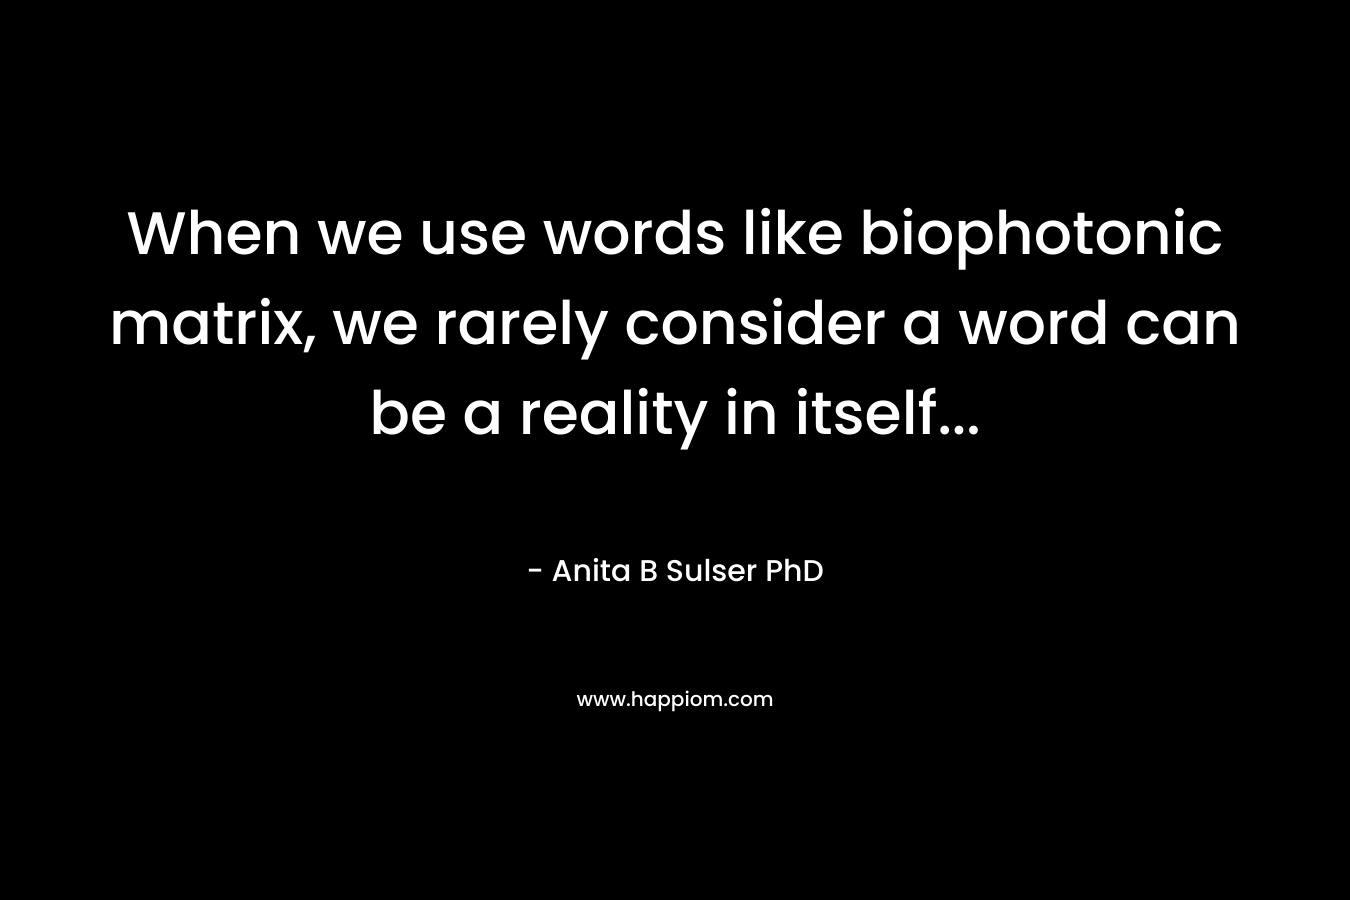 When we use words like biophotonic matrix, we rarely consider a word can be a reality in itself… – Anita B Sulser PhD